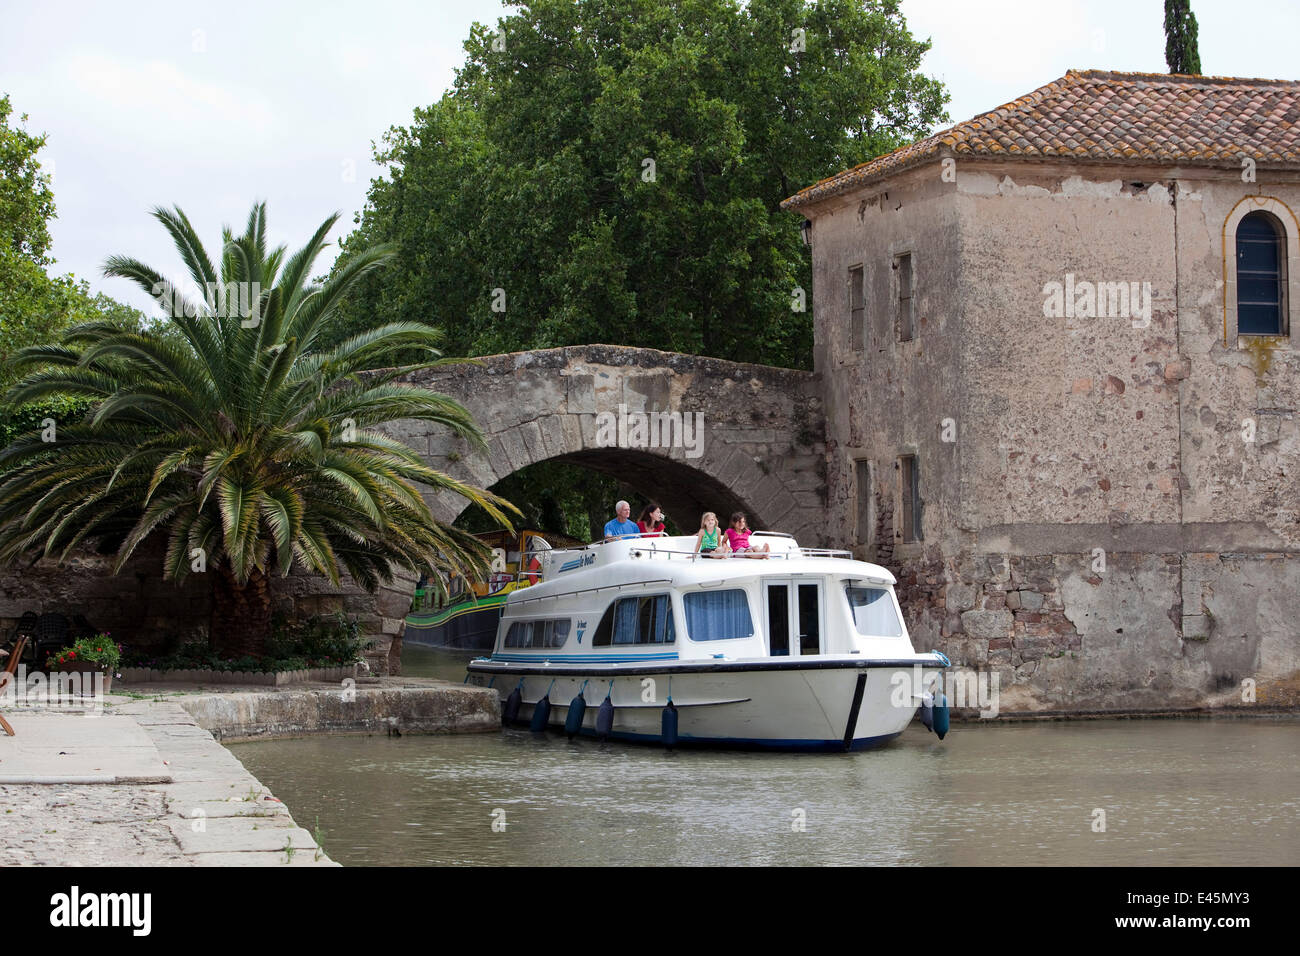 Family cruising on the Canal Du Midi, Le Somail, France. July 2009. Model released. Stock Photo